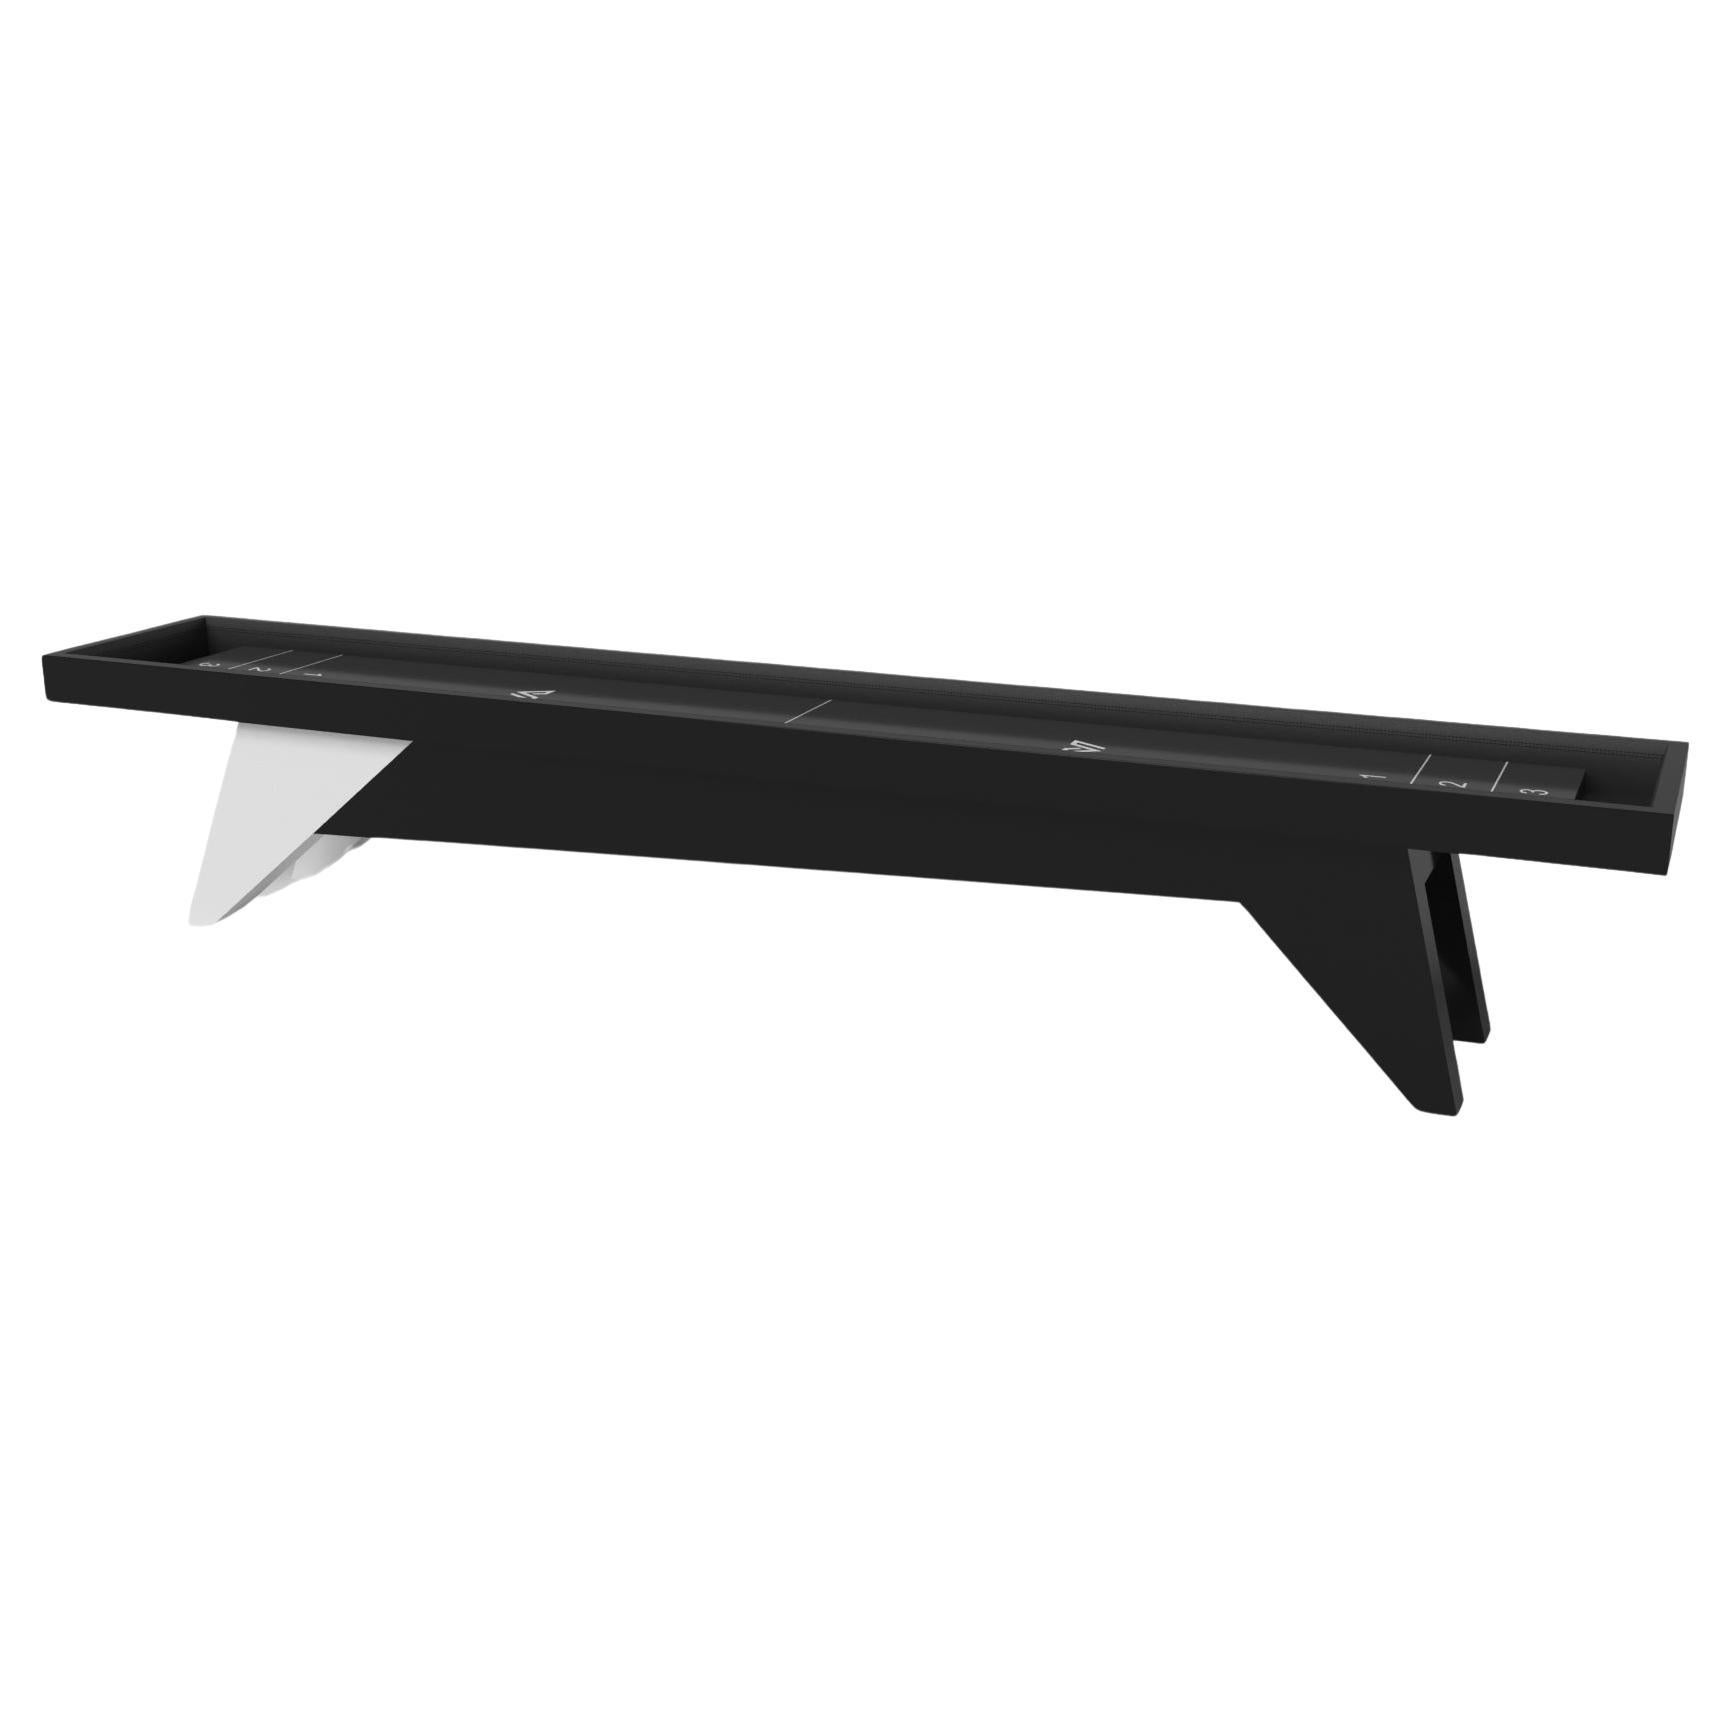 Elevate Customs Mantis Shuffleboard Tables /Solid Pantone Black Color in 9' -USA For Sale